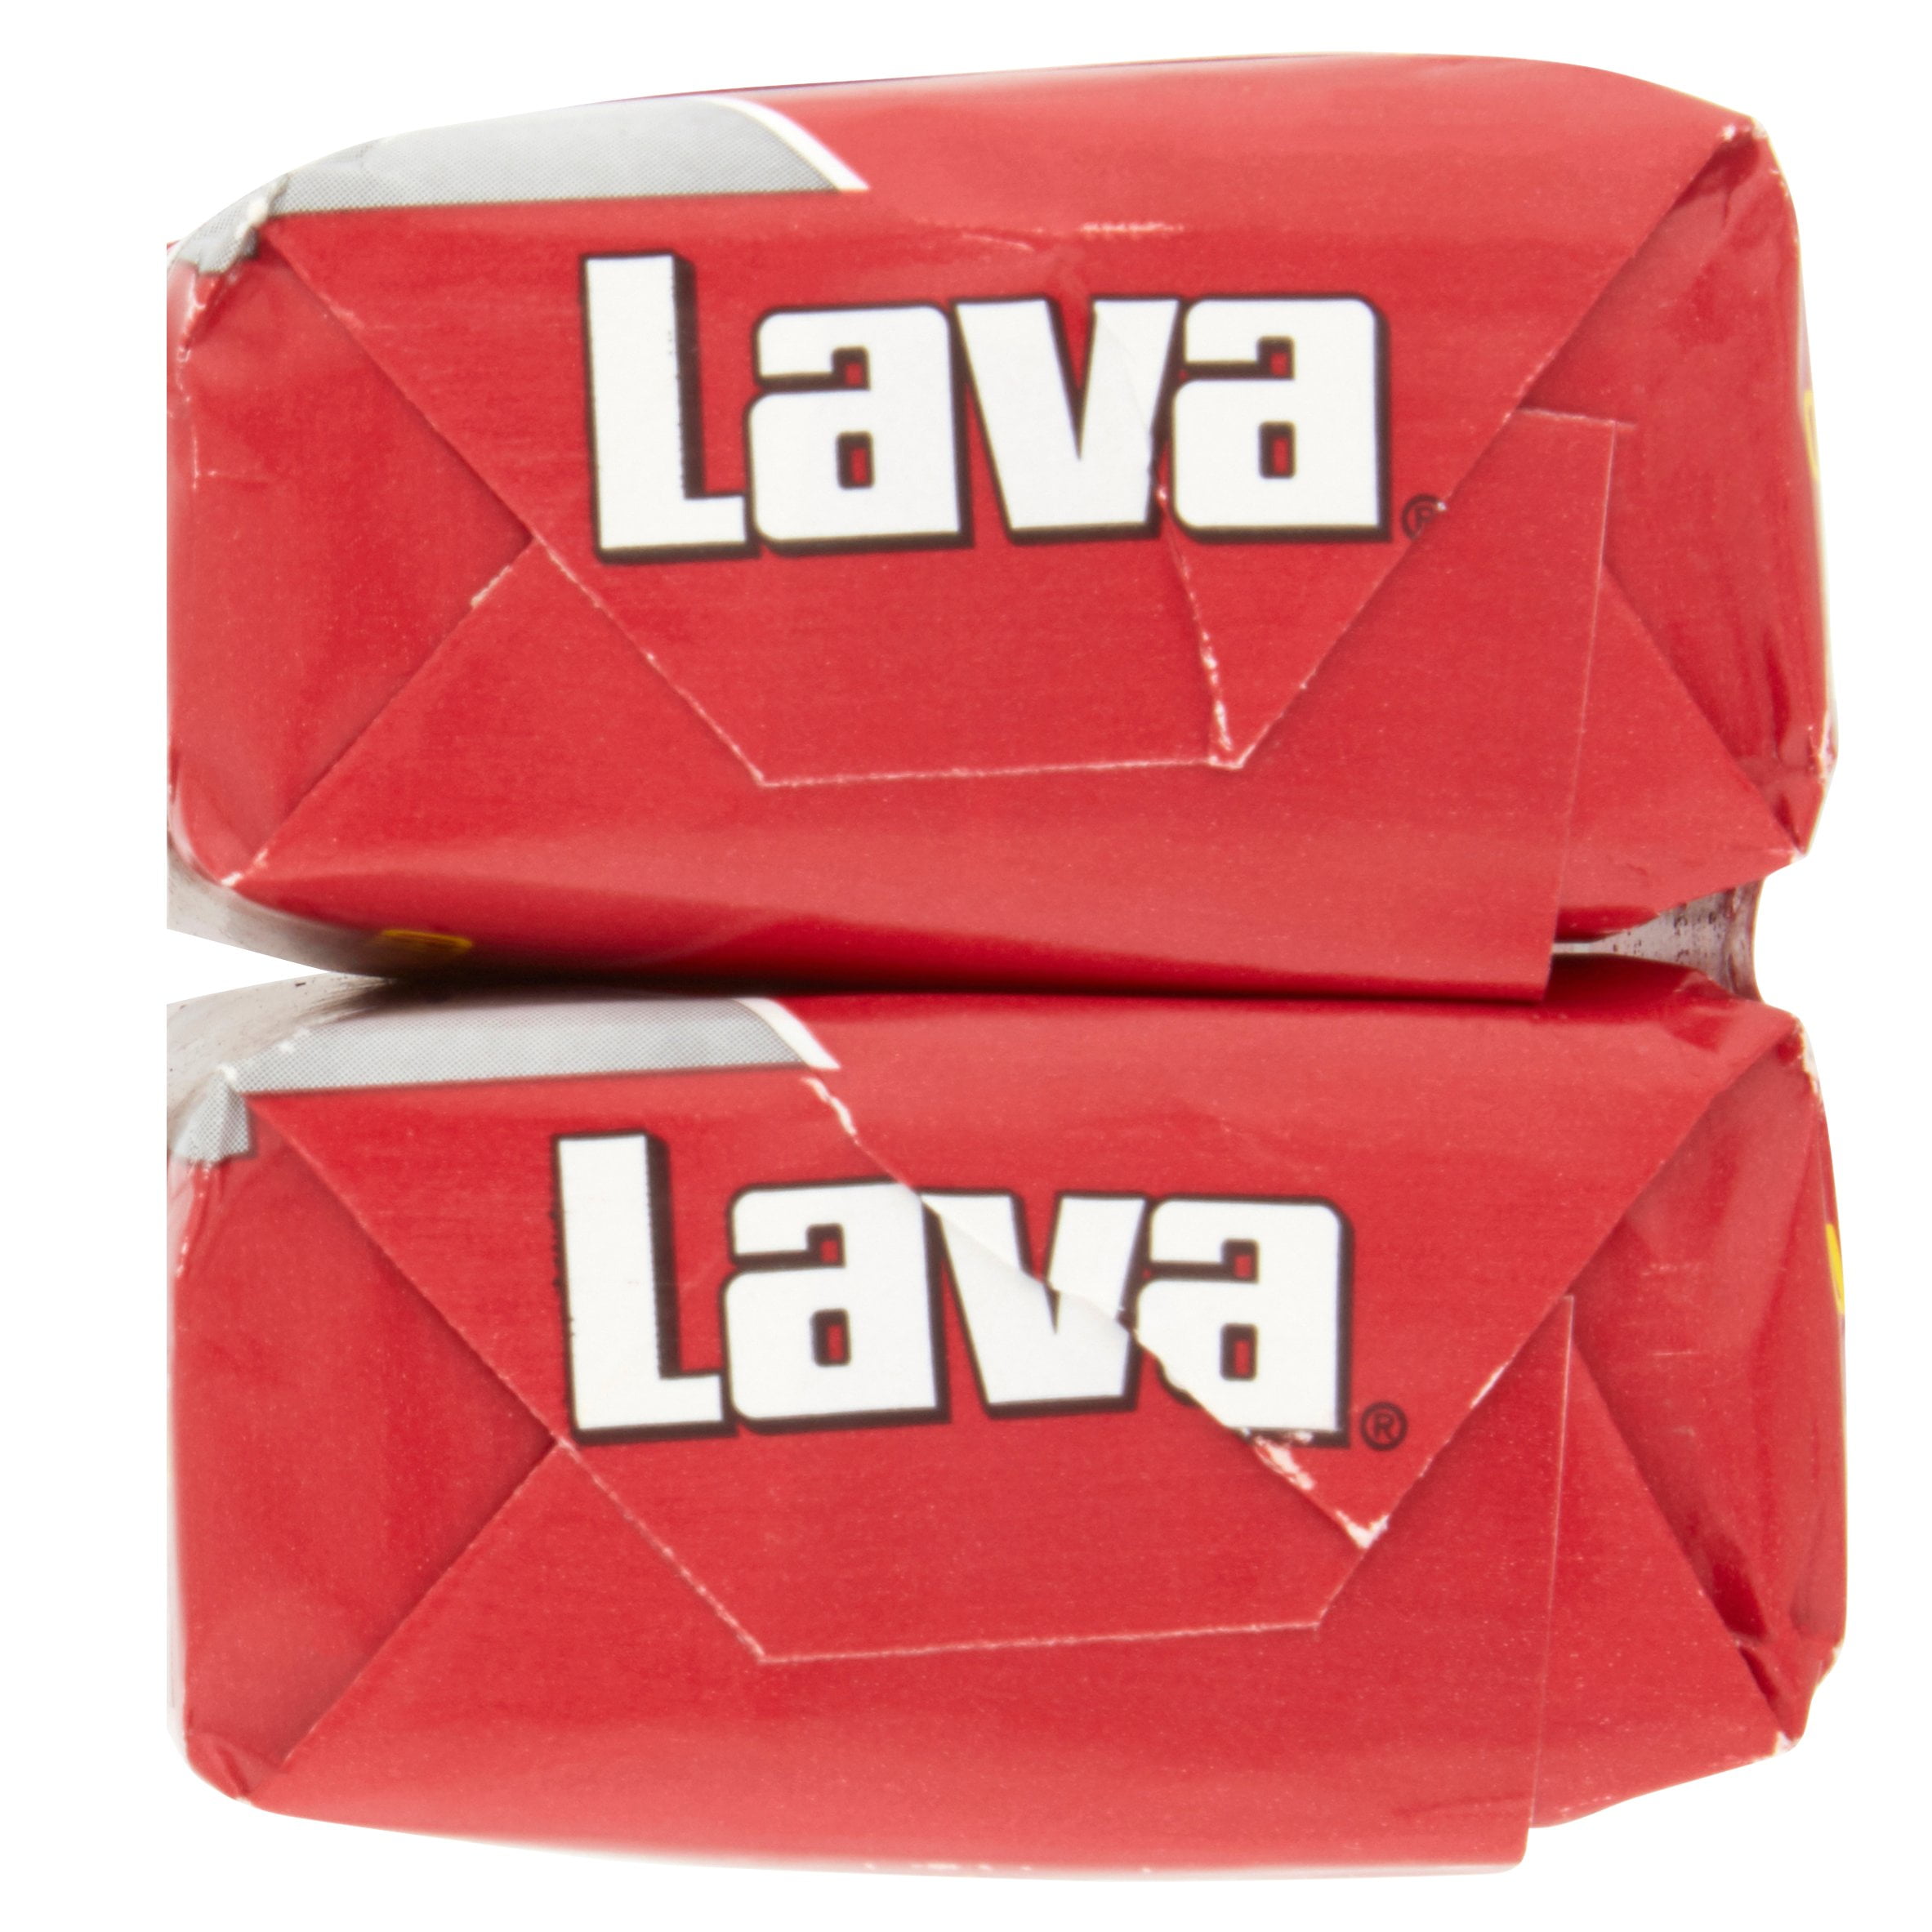 Value Pack Bar Soap - 2 Ct by Lava at Fleet Farm